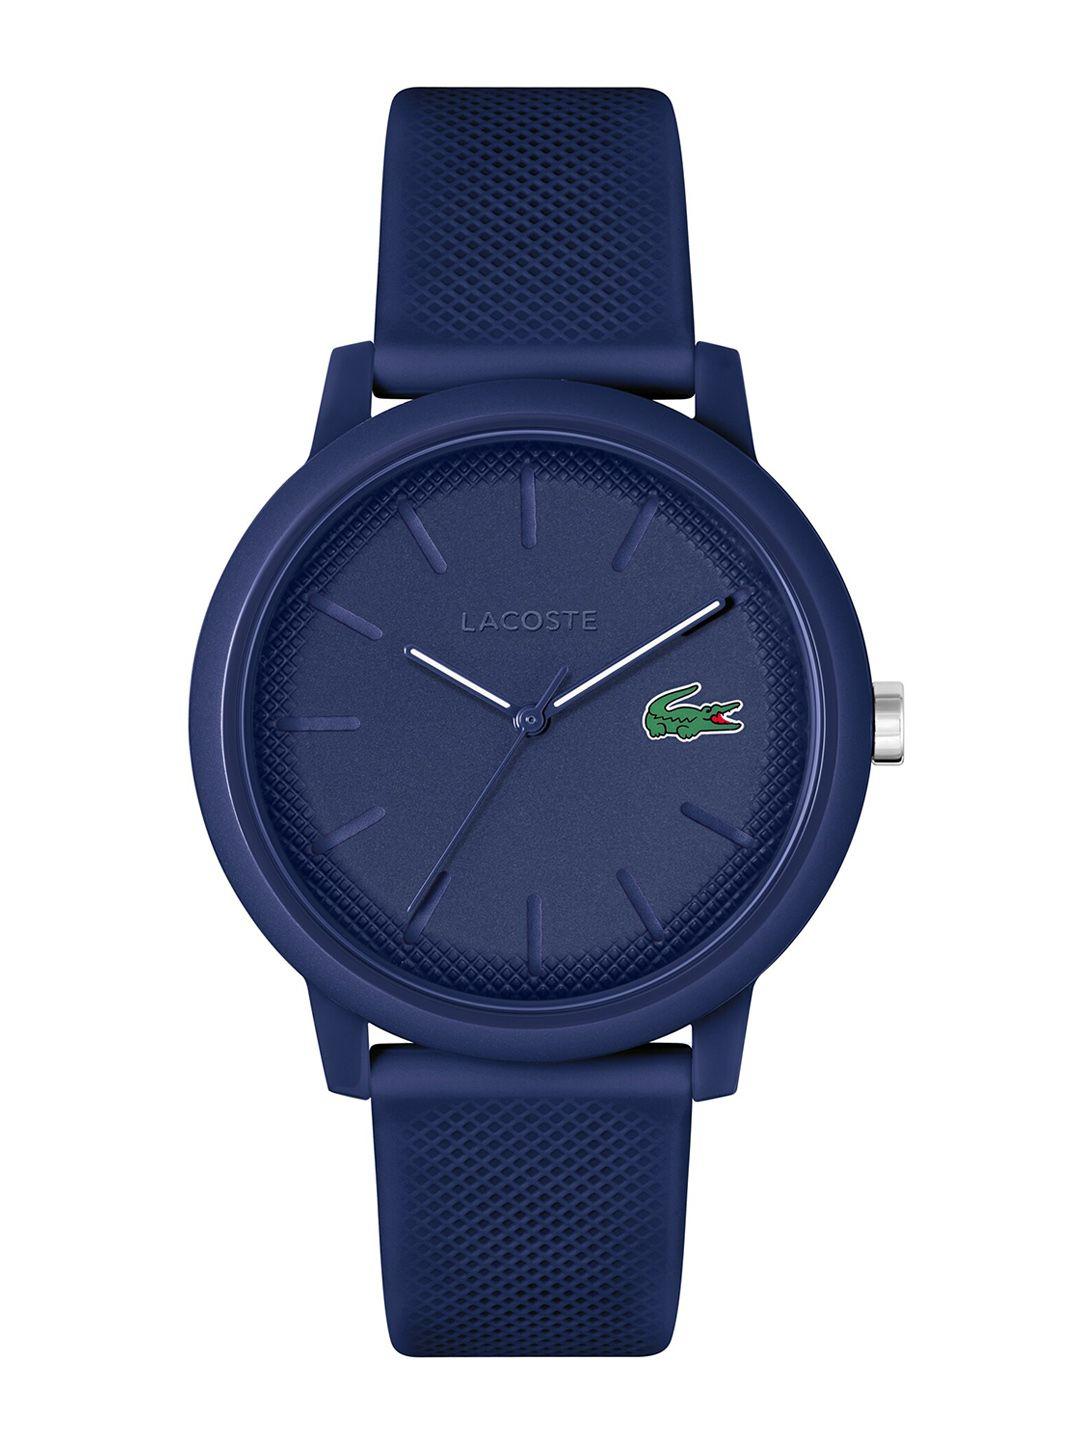 Lacoste Men Brass Dial & Straps Analogue Watch